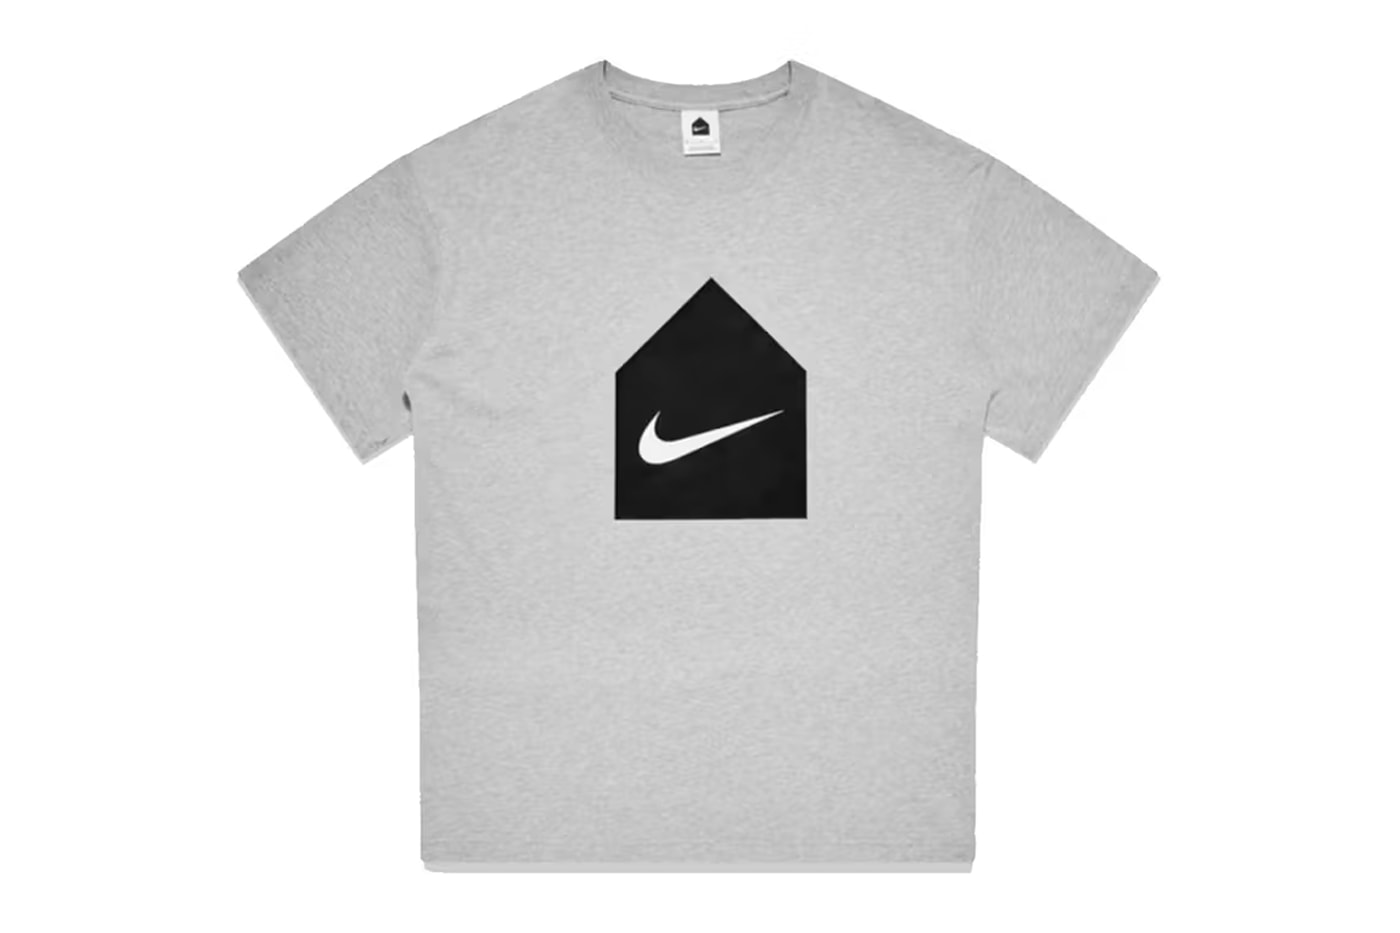 Nike and Dover Street Market Drop Iconographic Essentials